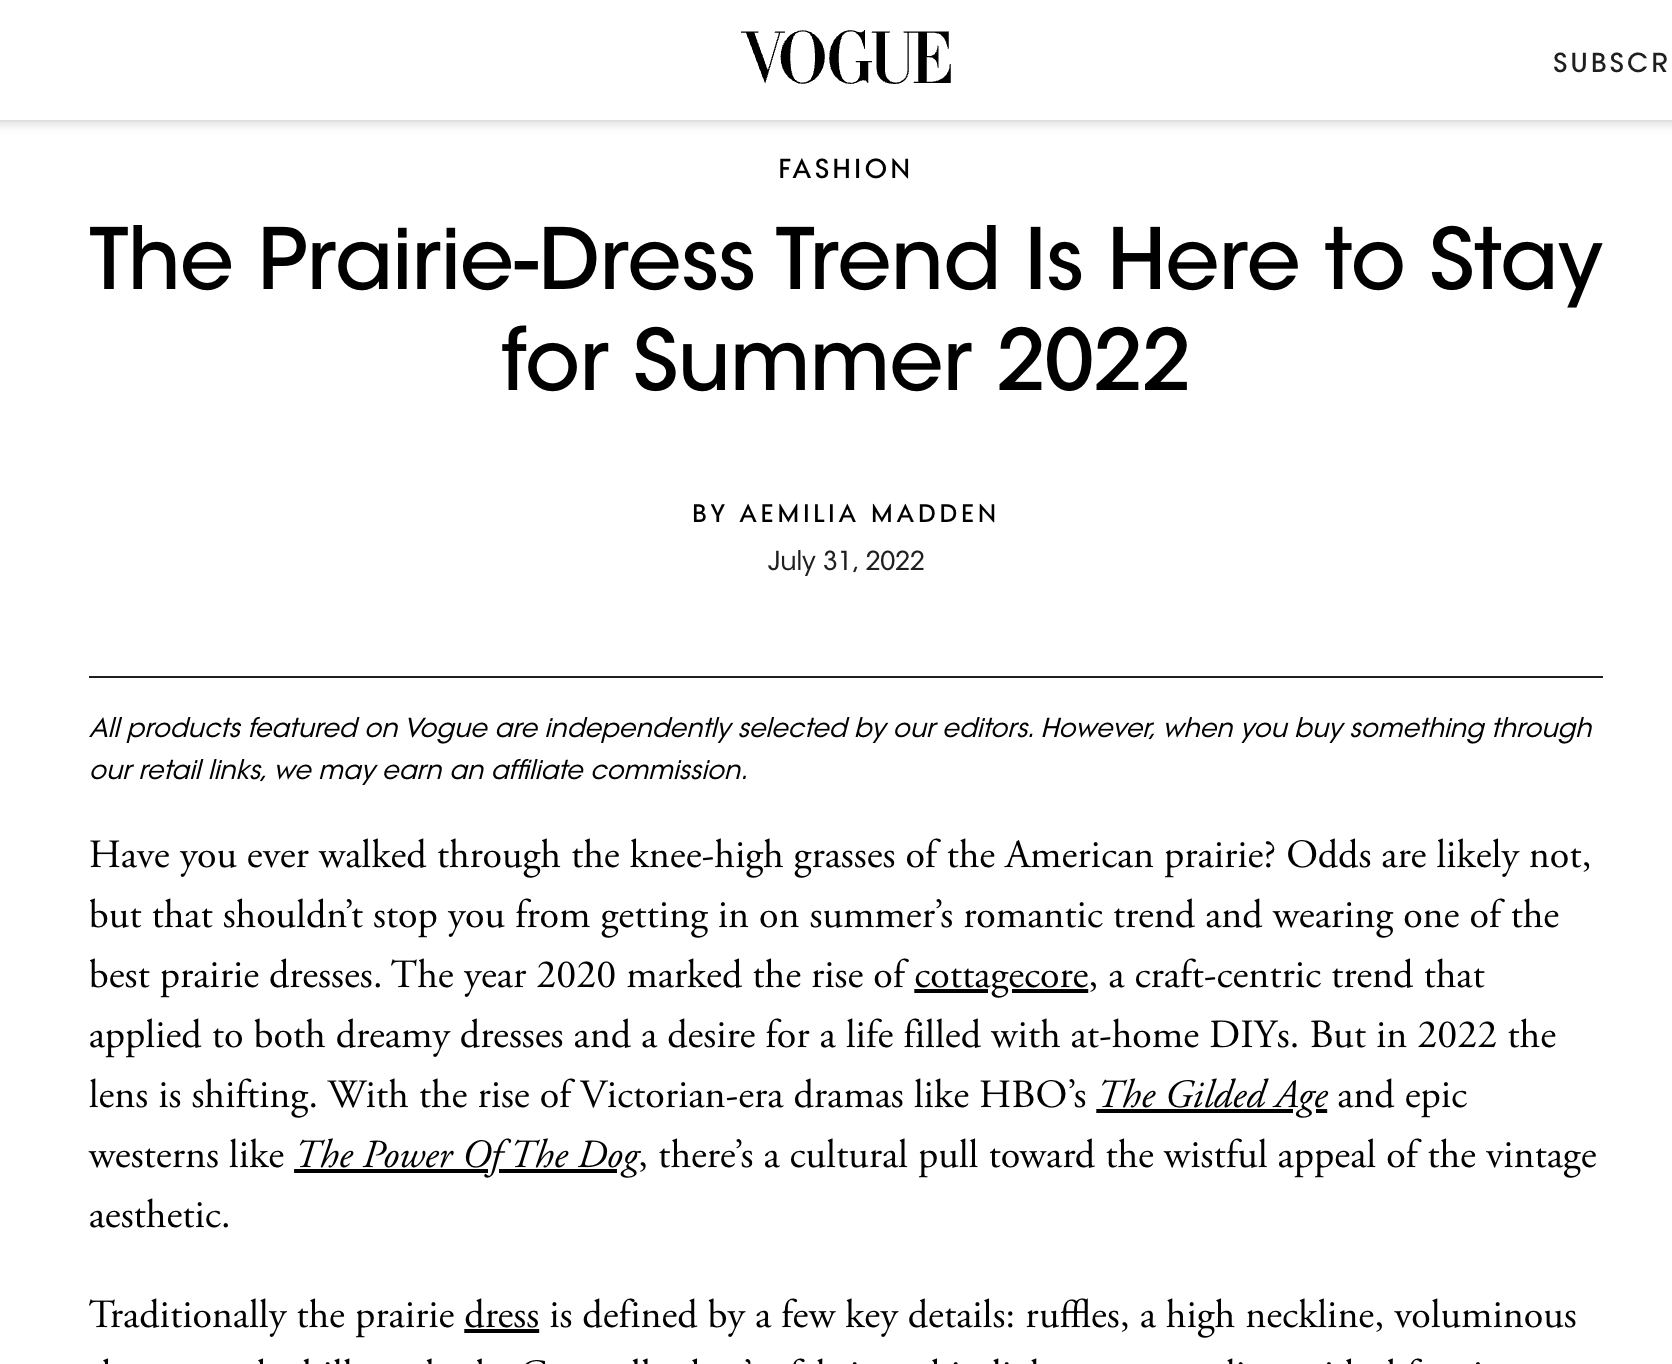 The Prairie-Dress Trend Is Here to Stay for Summer 2022